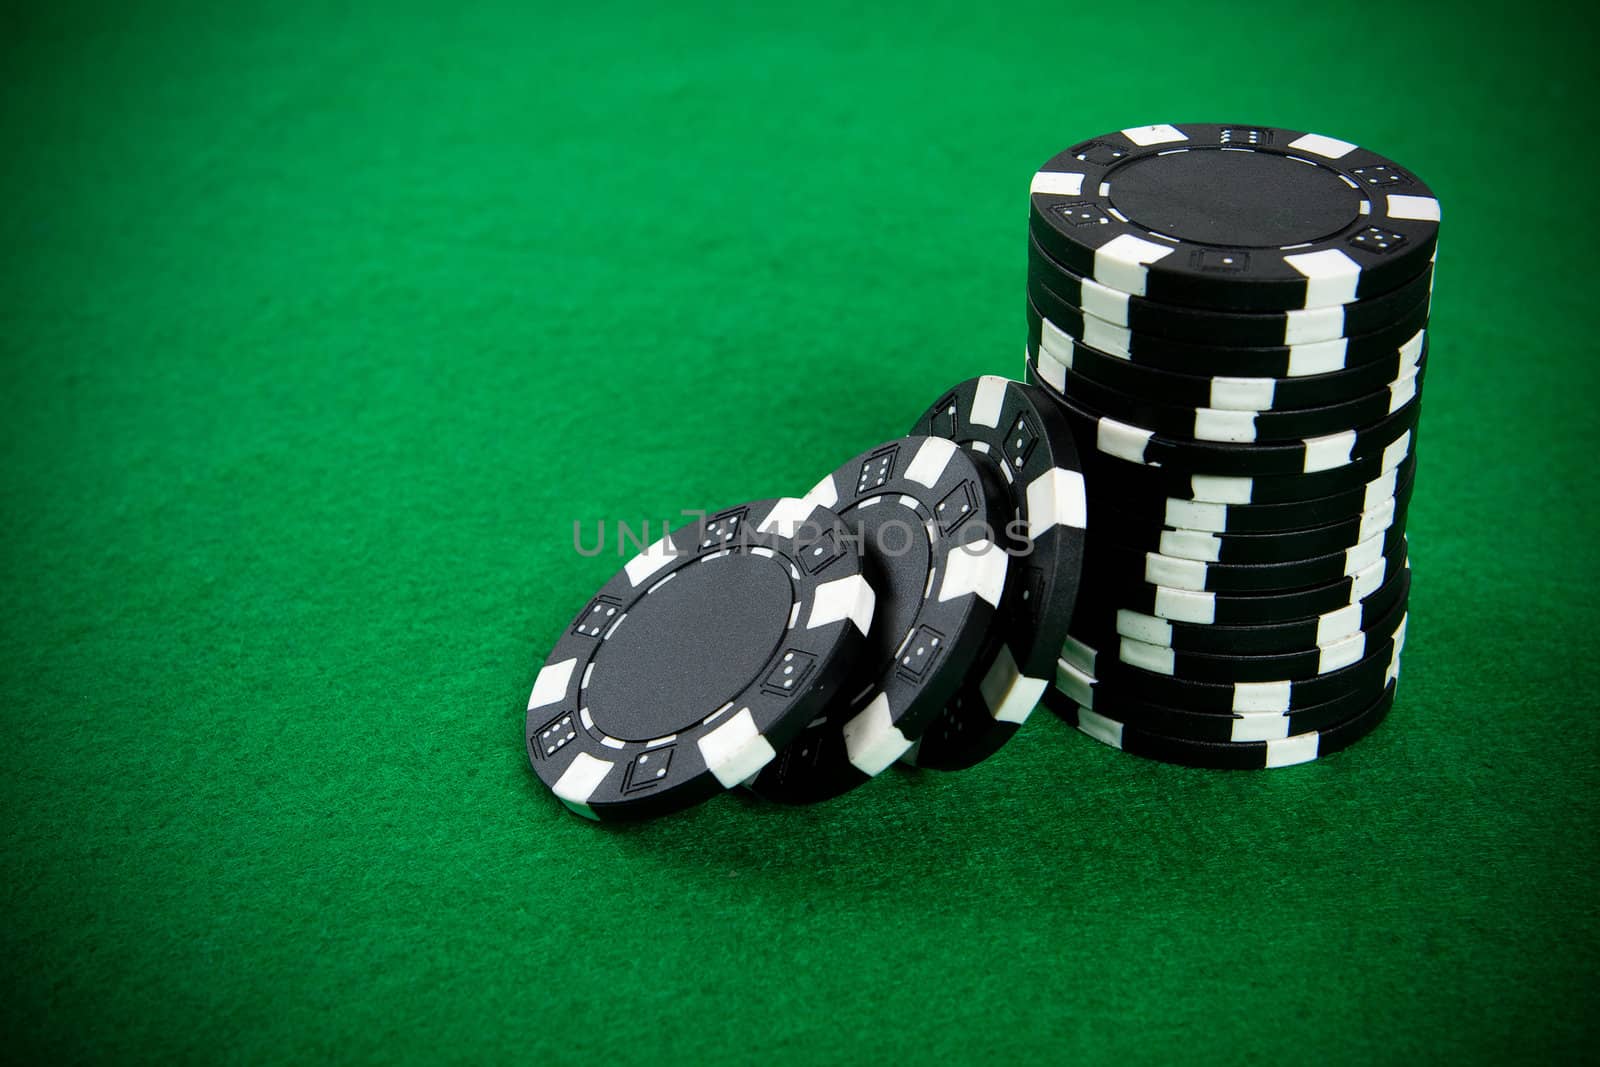 Stack of black poker chips on a green poker table background.